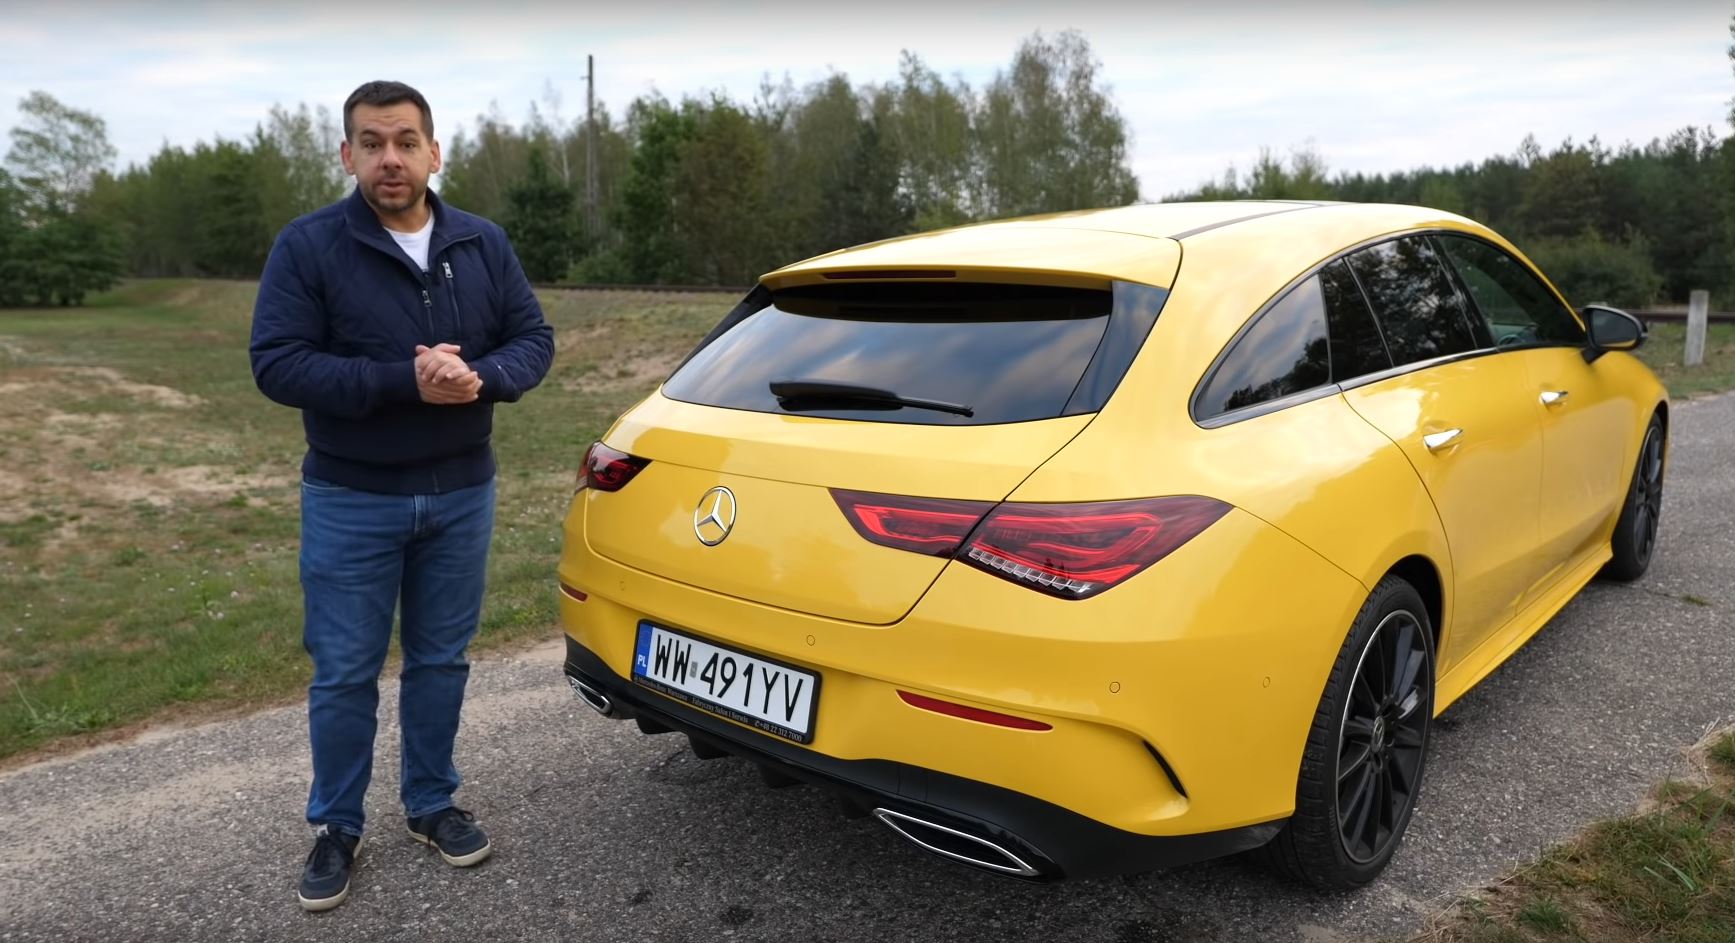 2020 Mercedes CLA Shooting Brake Review Reveals Problems With Trunk, 1.3L Engine - autoevolution